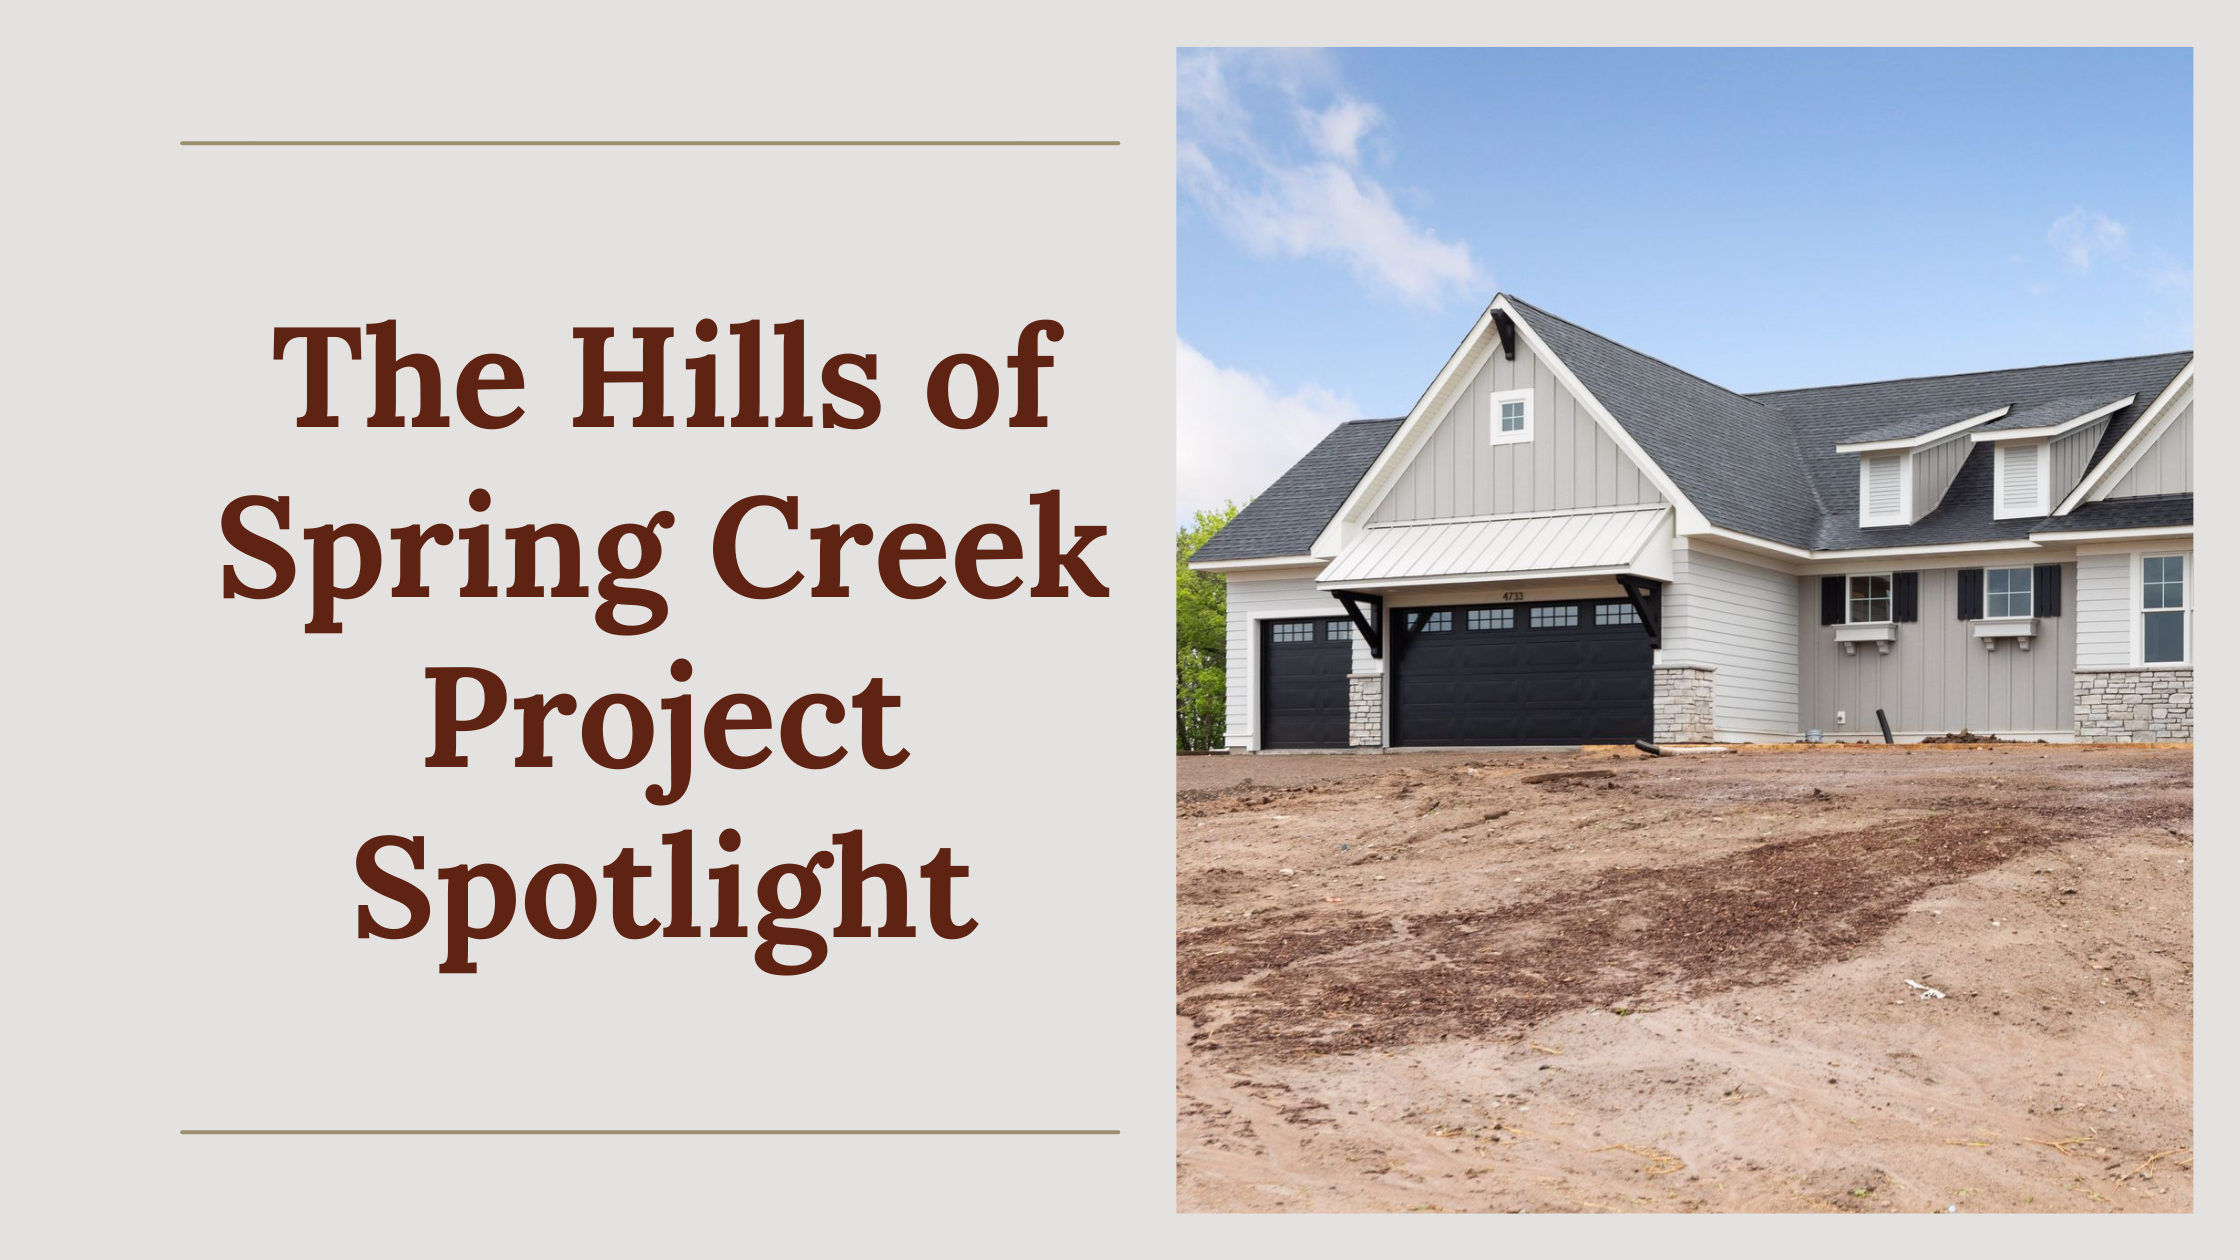 The Hills of Spring Creek Project Spotlight